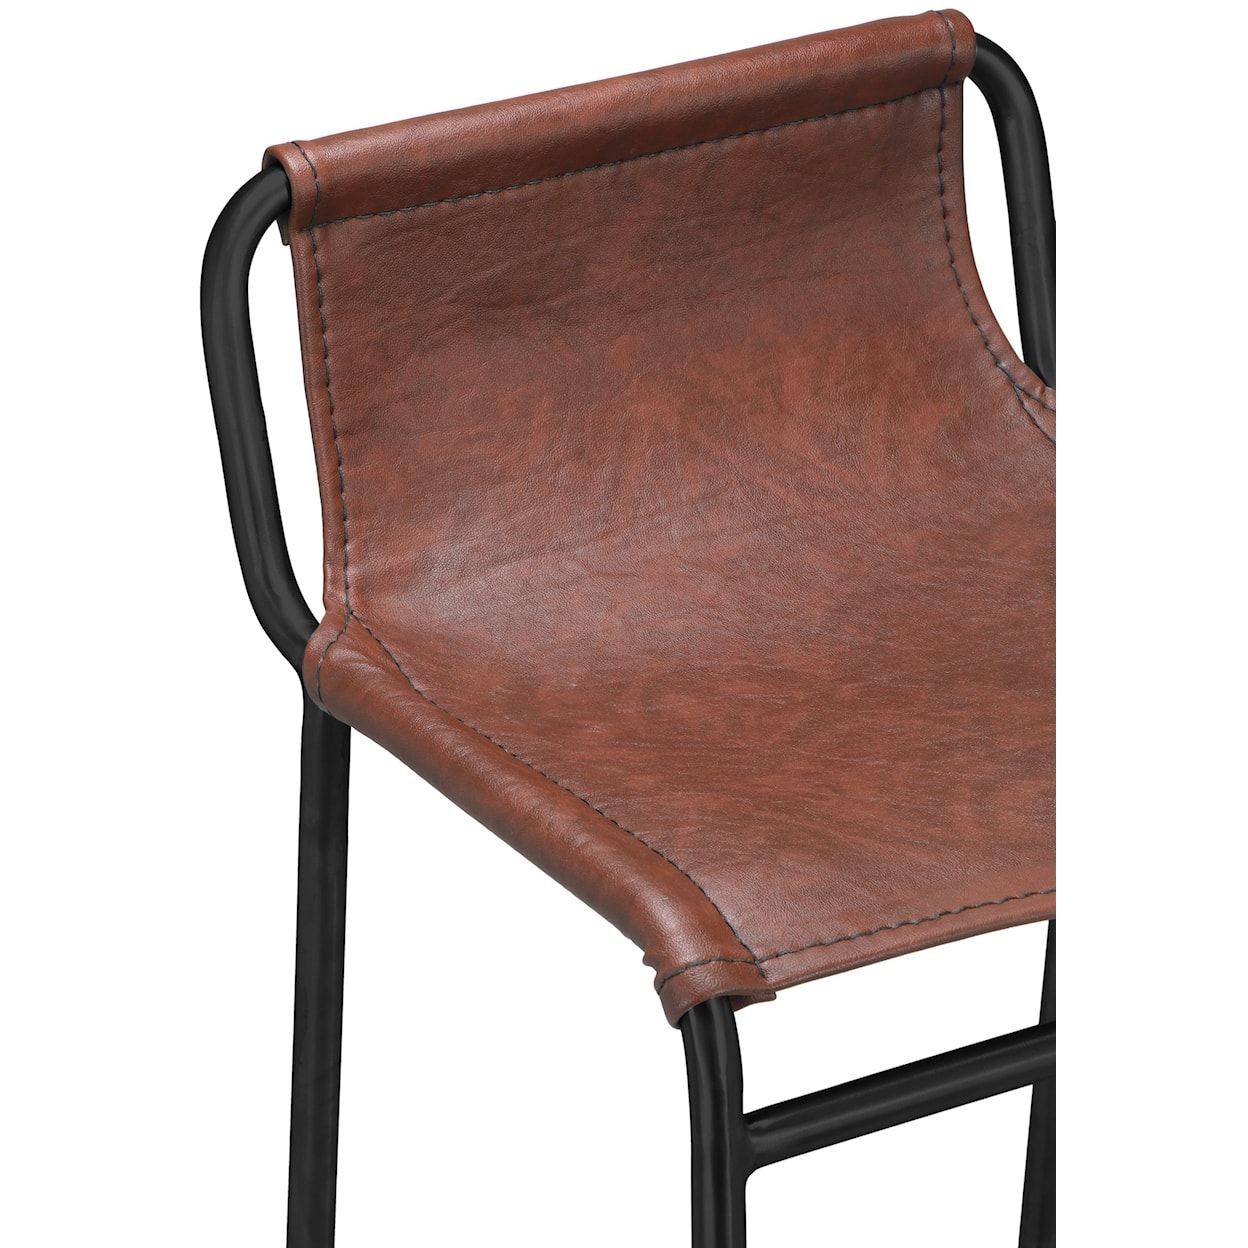 Meridian Furniture Dax Brown Faux Leather Counter Stool